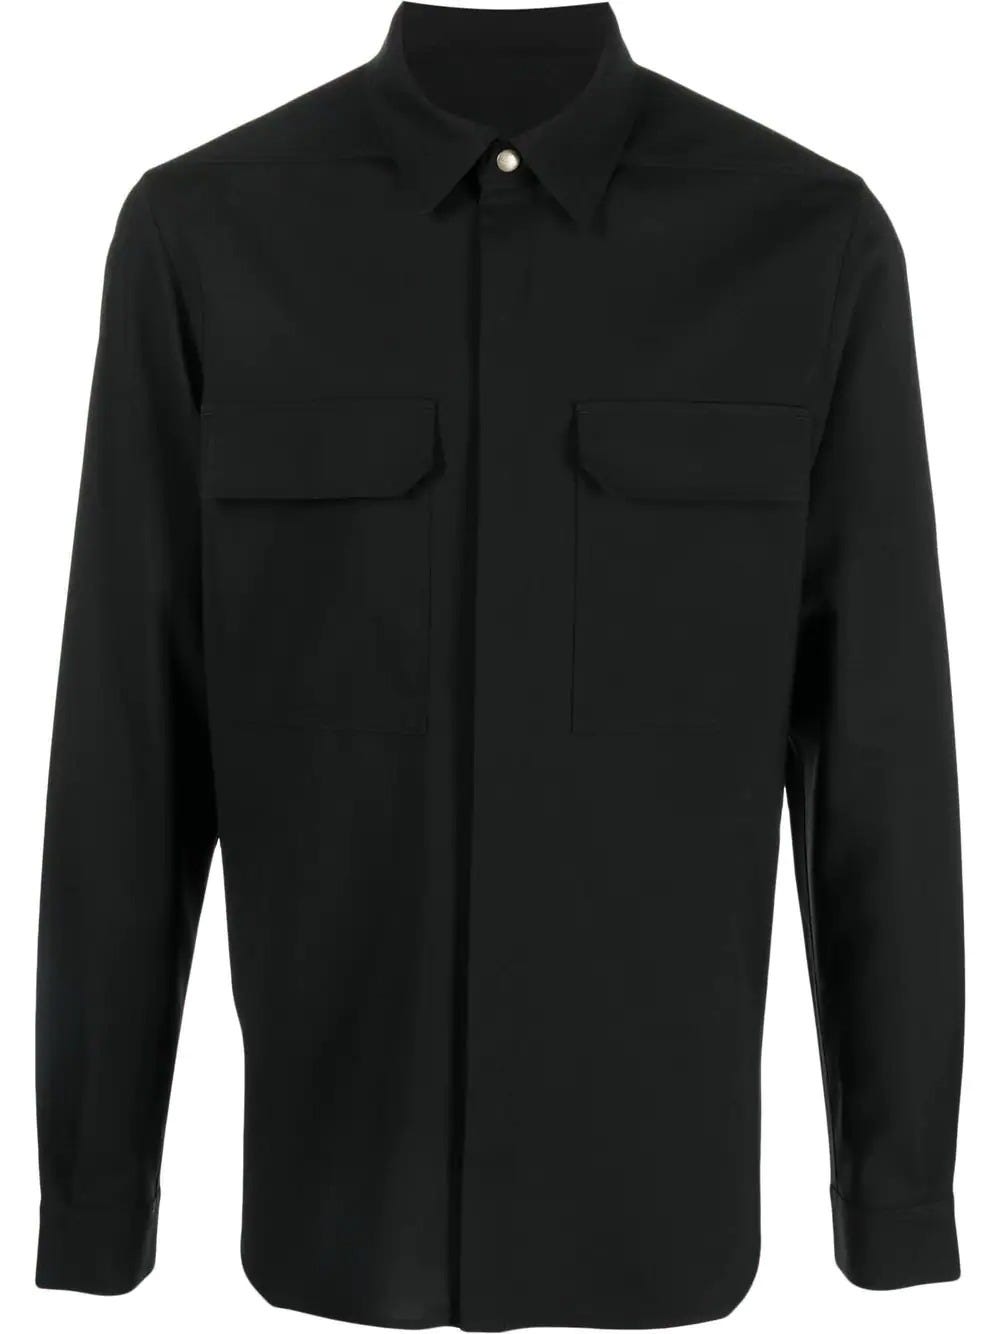 RICK OWENS SHIRT-JACKET WITH CONCEALED FRONT FASTENING